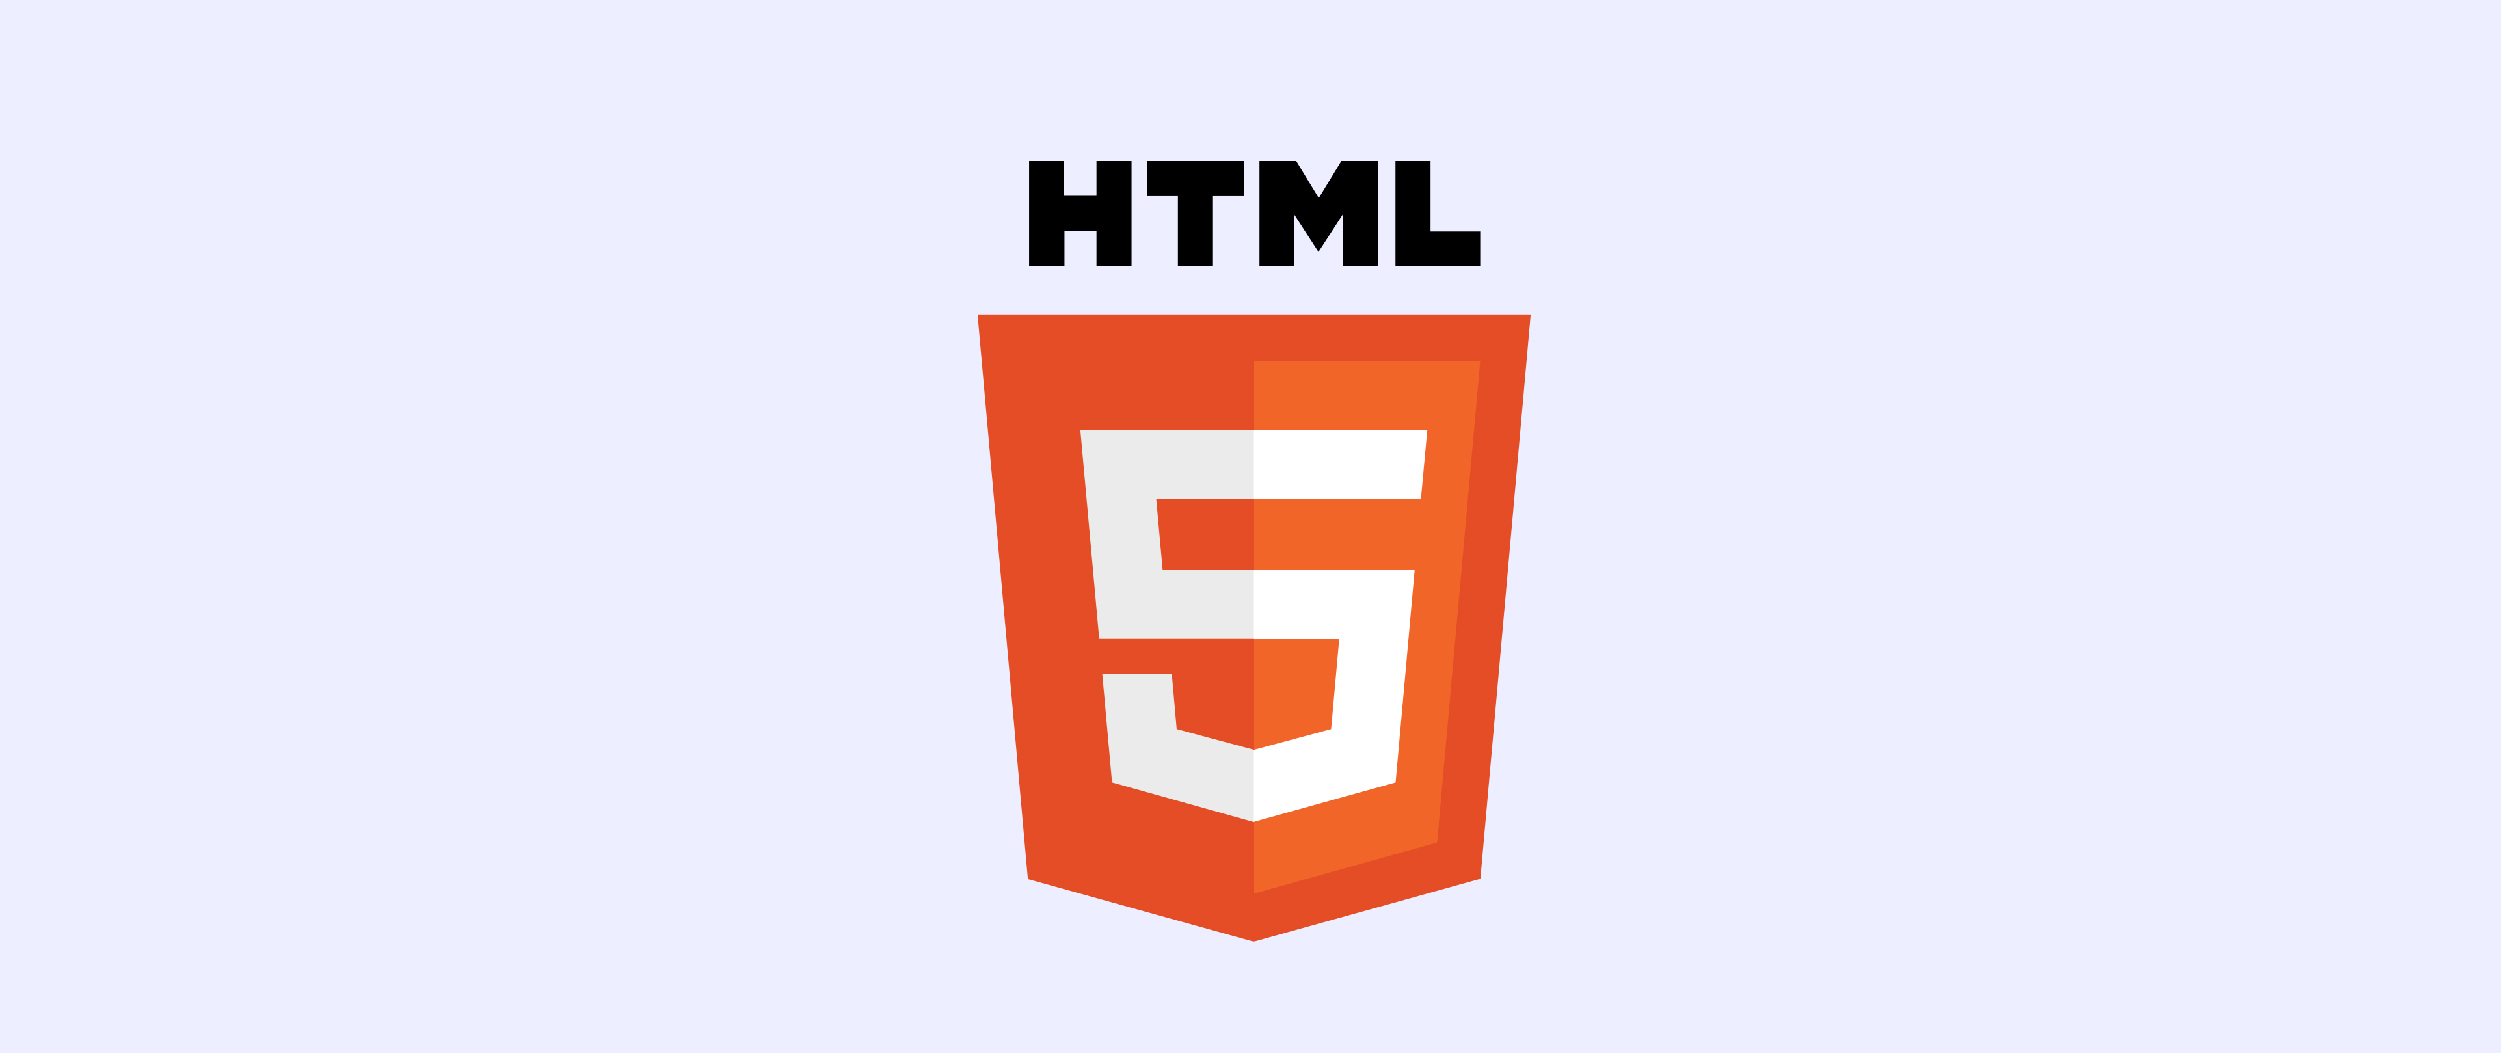 Best Practices for HTML5 Video Playback